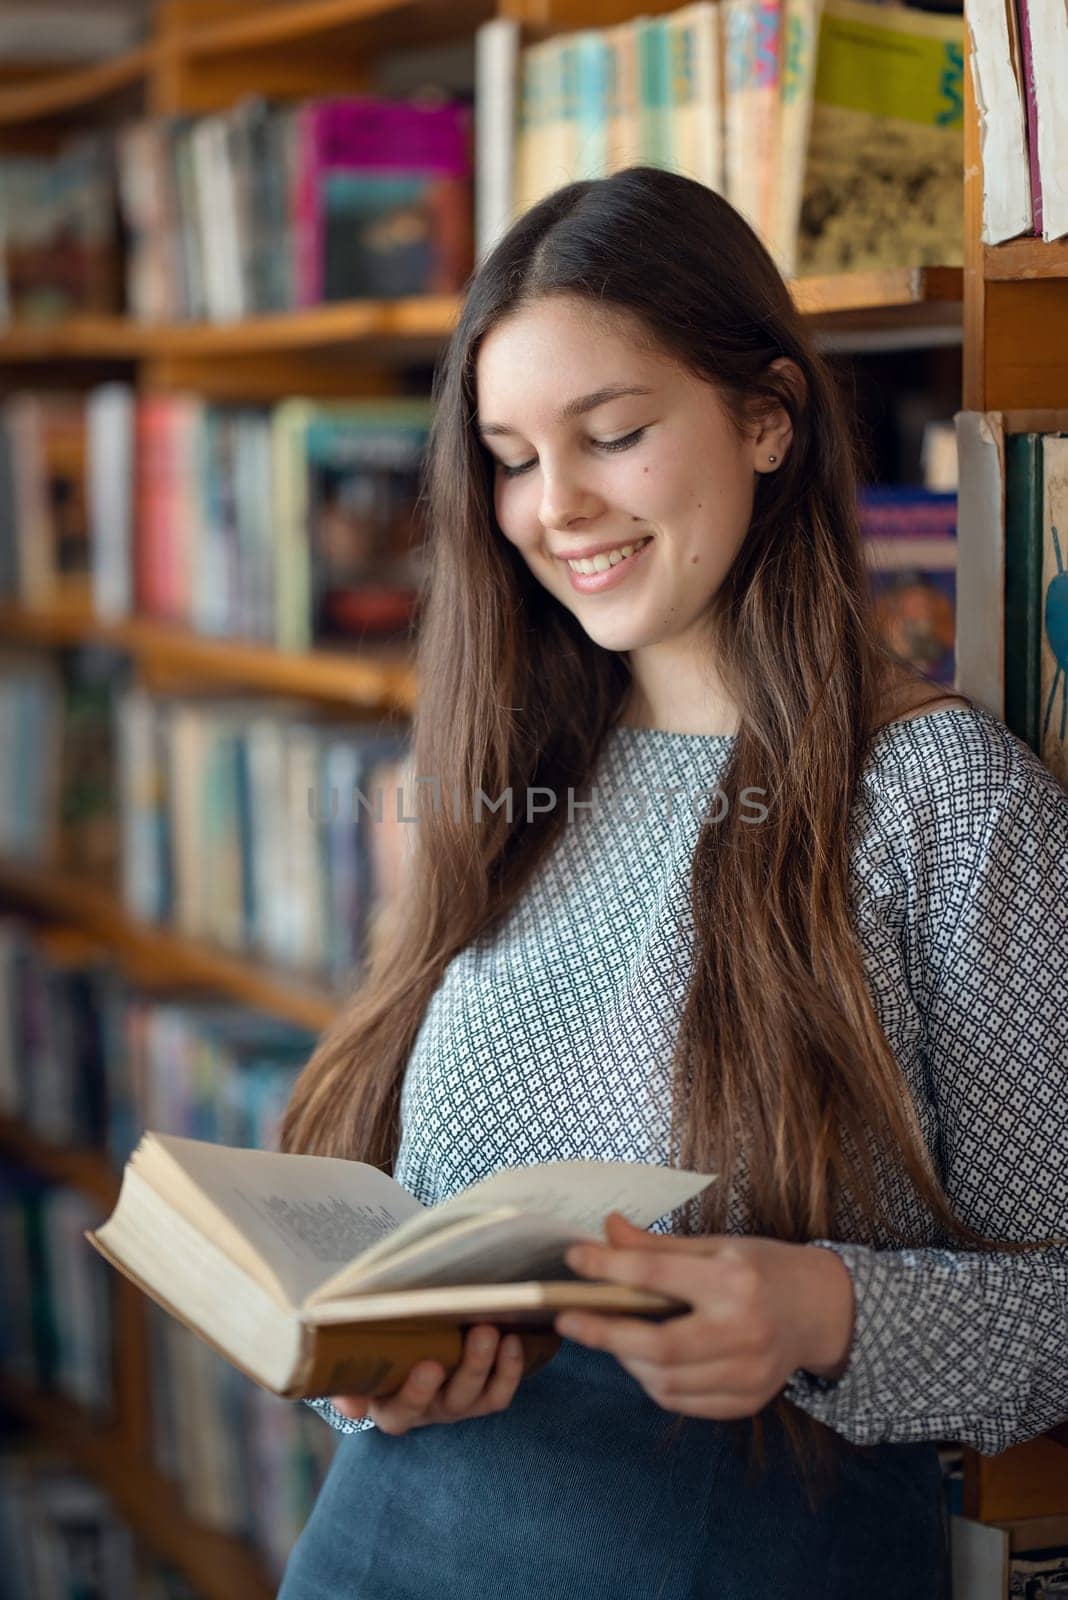 Cheerful relaxed girl standing with book in her hands, library shelves on the background